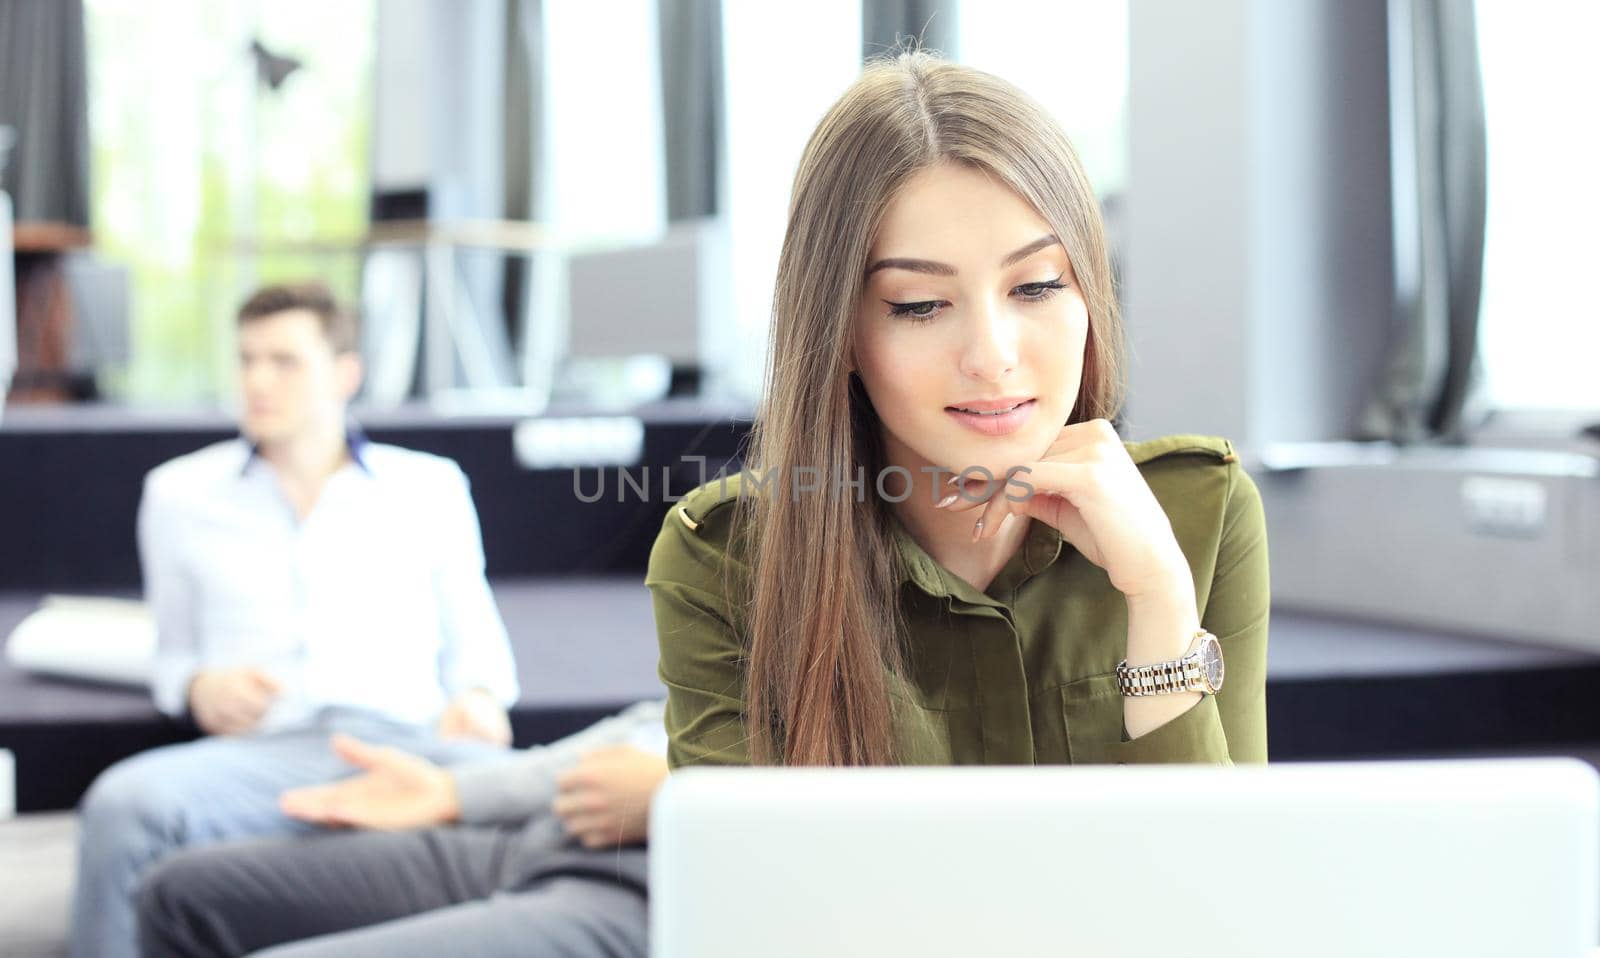 young woman smiling and typing on laptop in modern office.